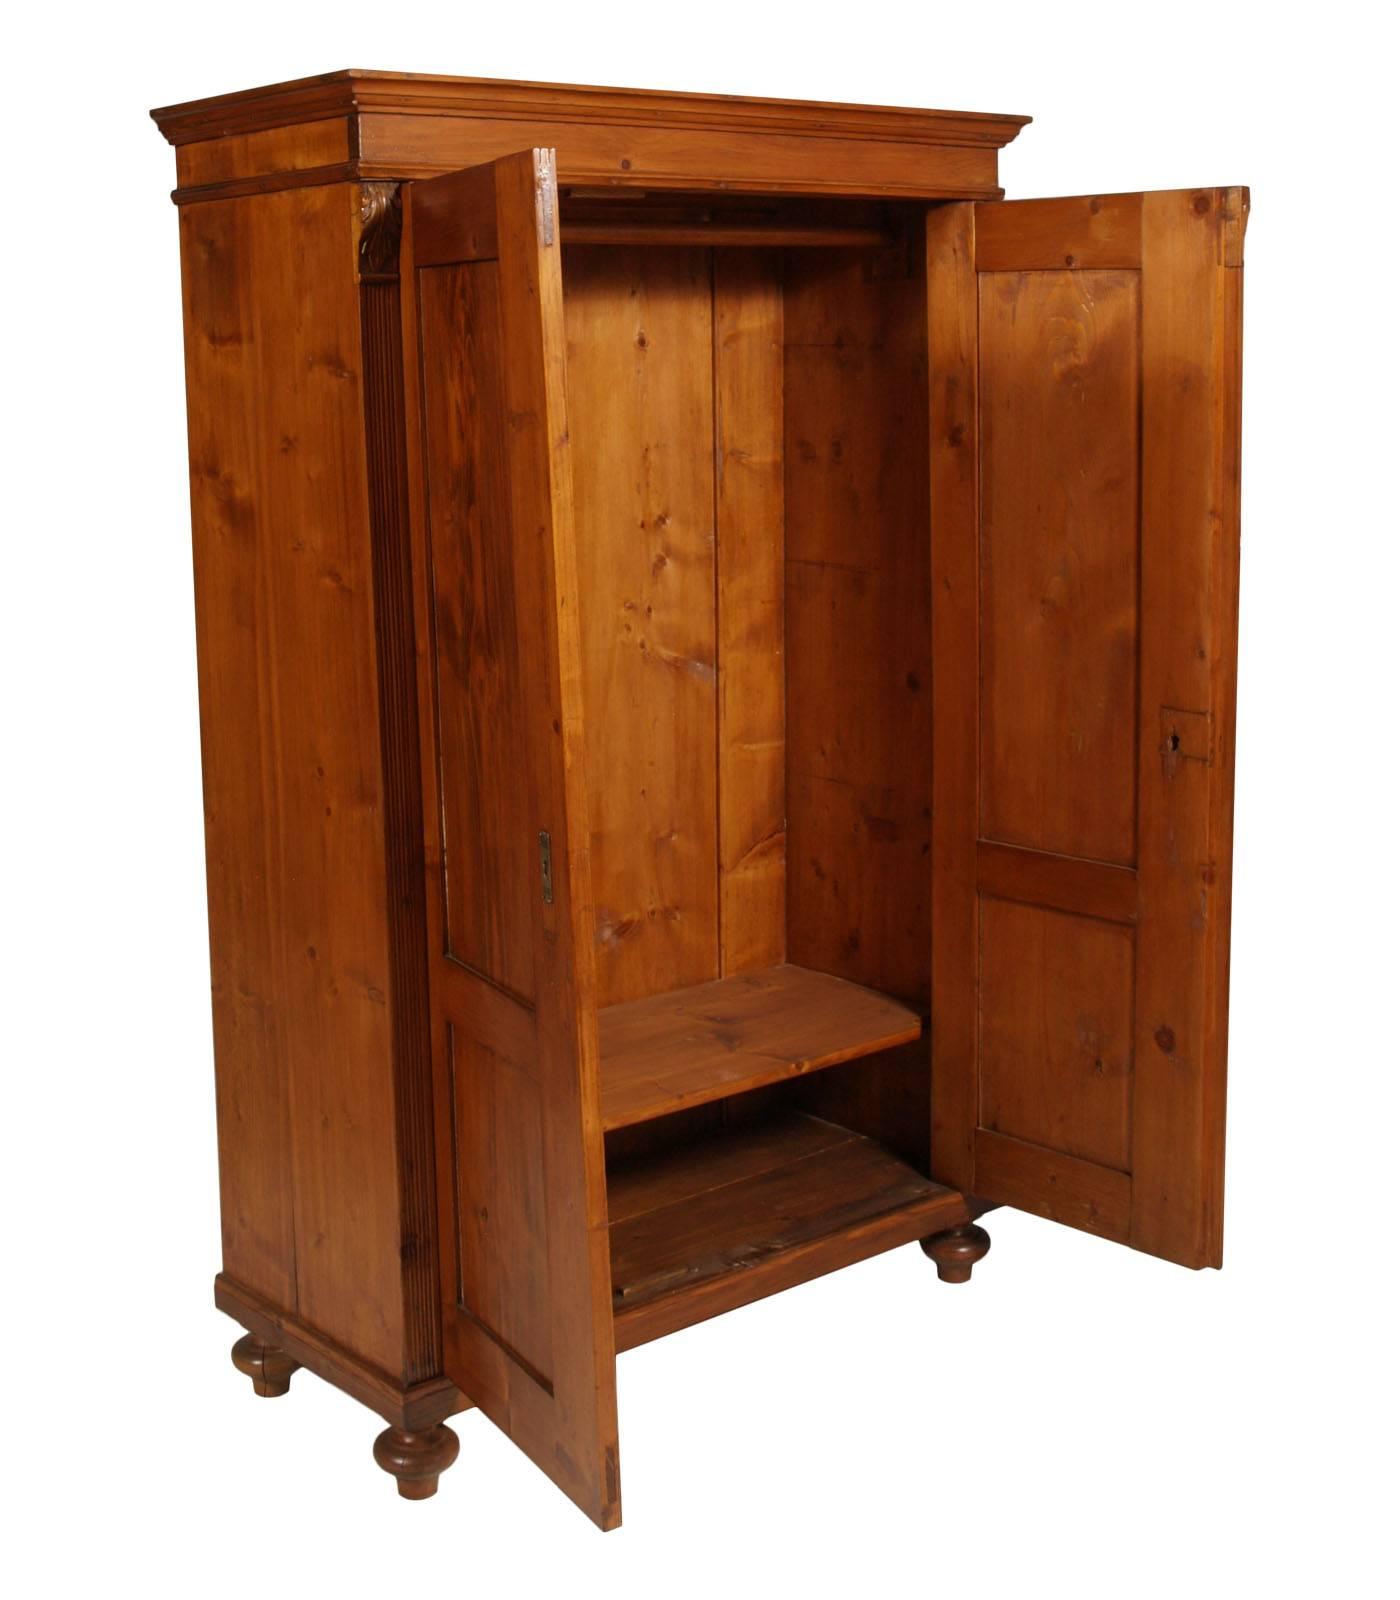 Antique country Tyrolean armoire  of  late 19th century in solid wood of pine restored and wax polished

Measures cm: H 180 x W 116 x D 52.